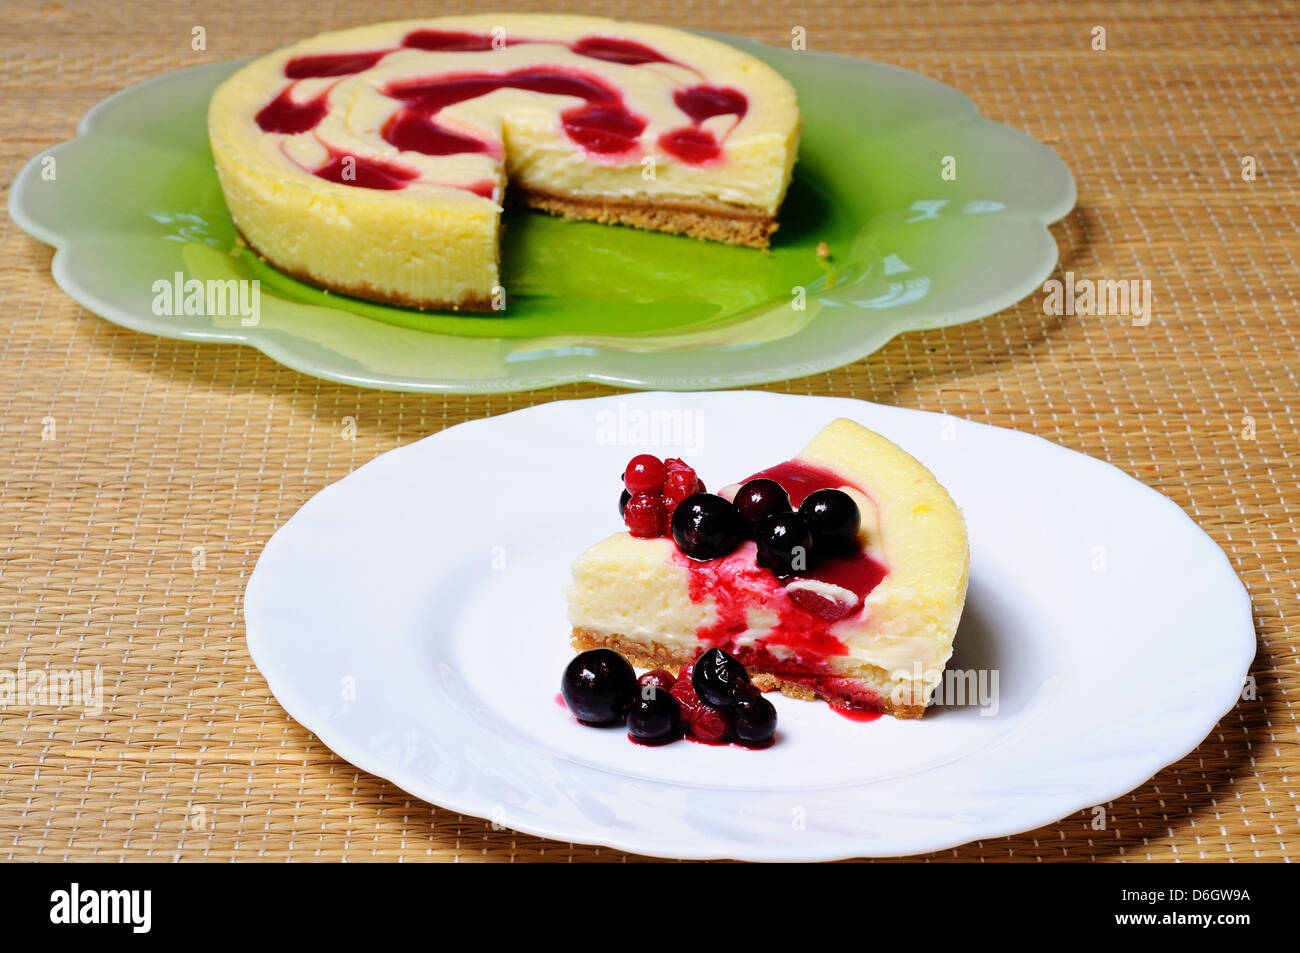 Cheesecake topped with raspberry syrup and fresh red berries. Stock Photo